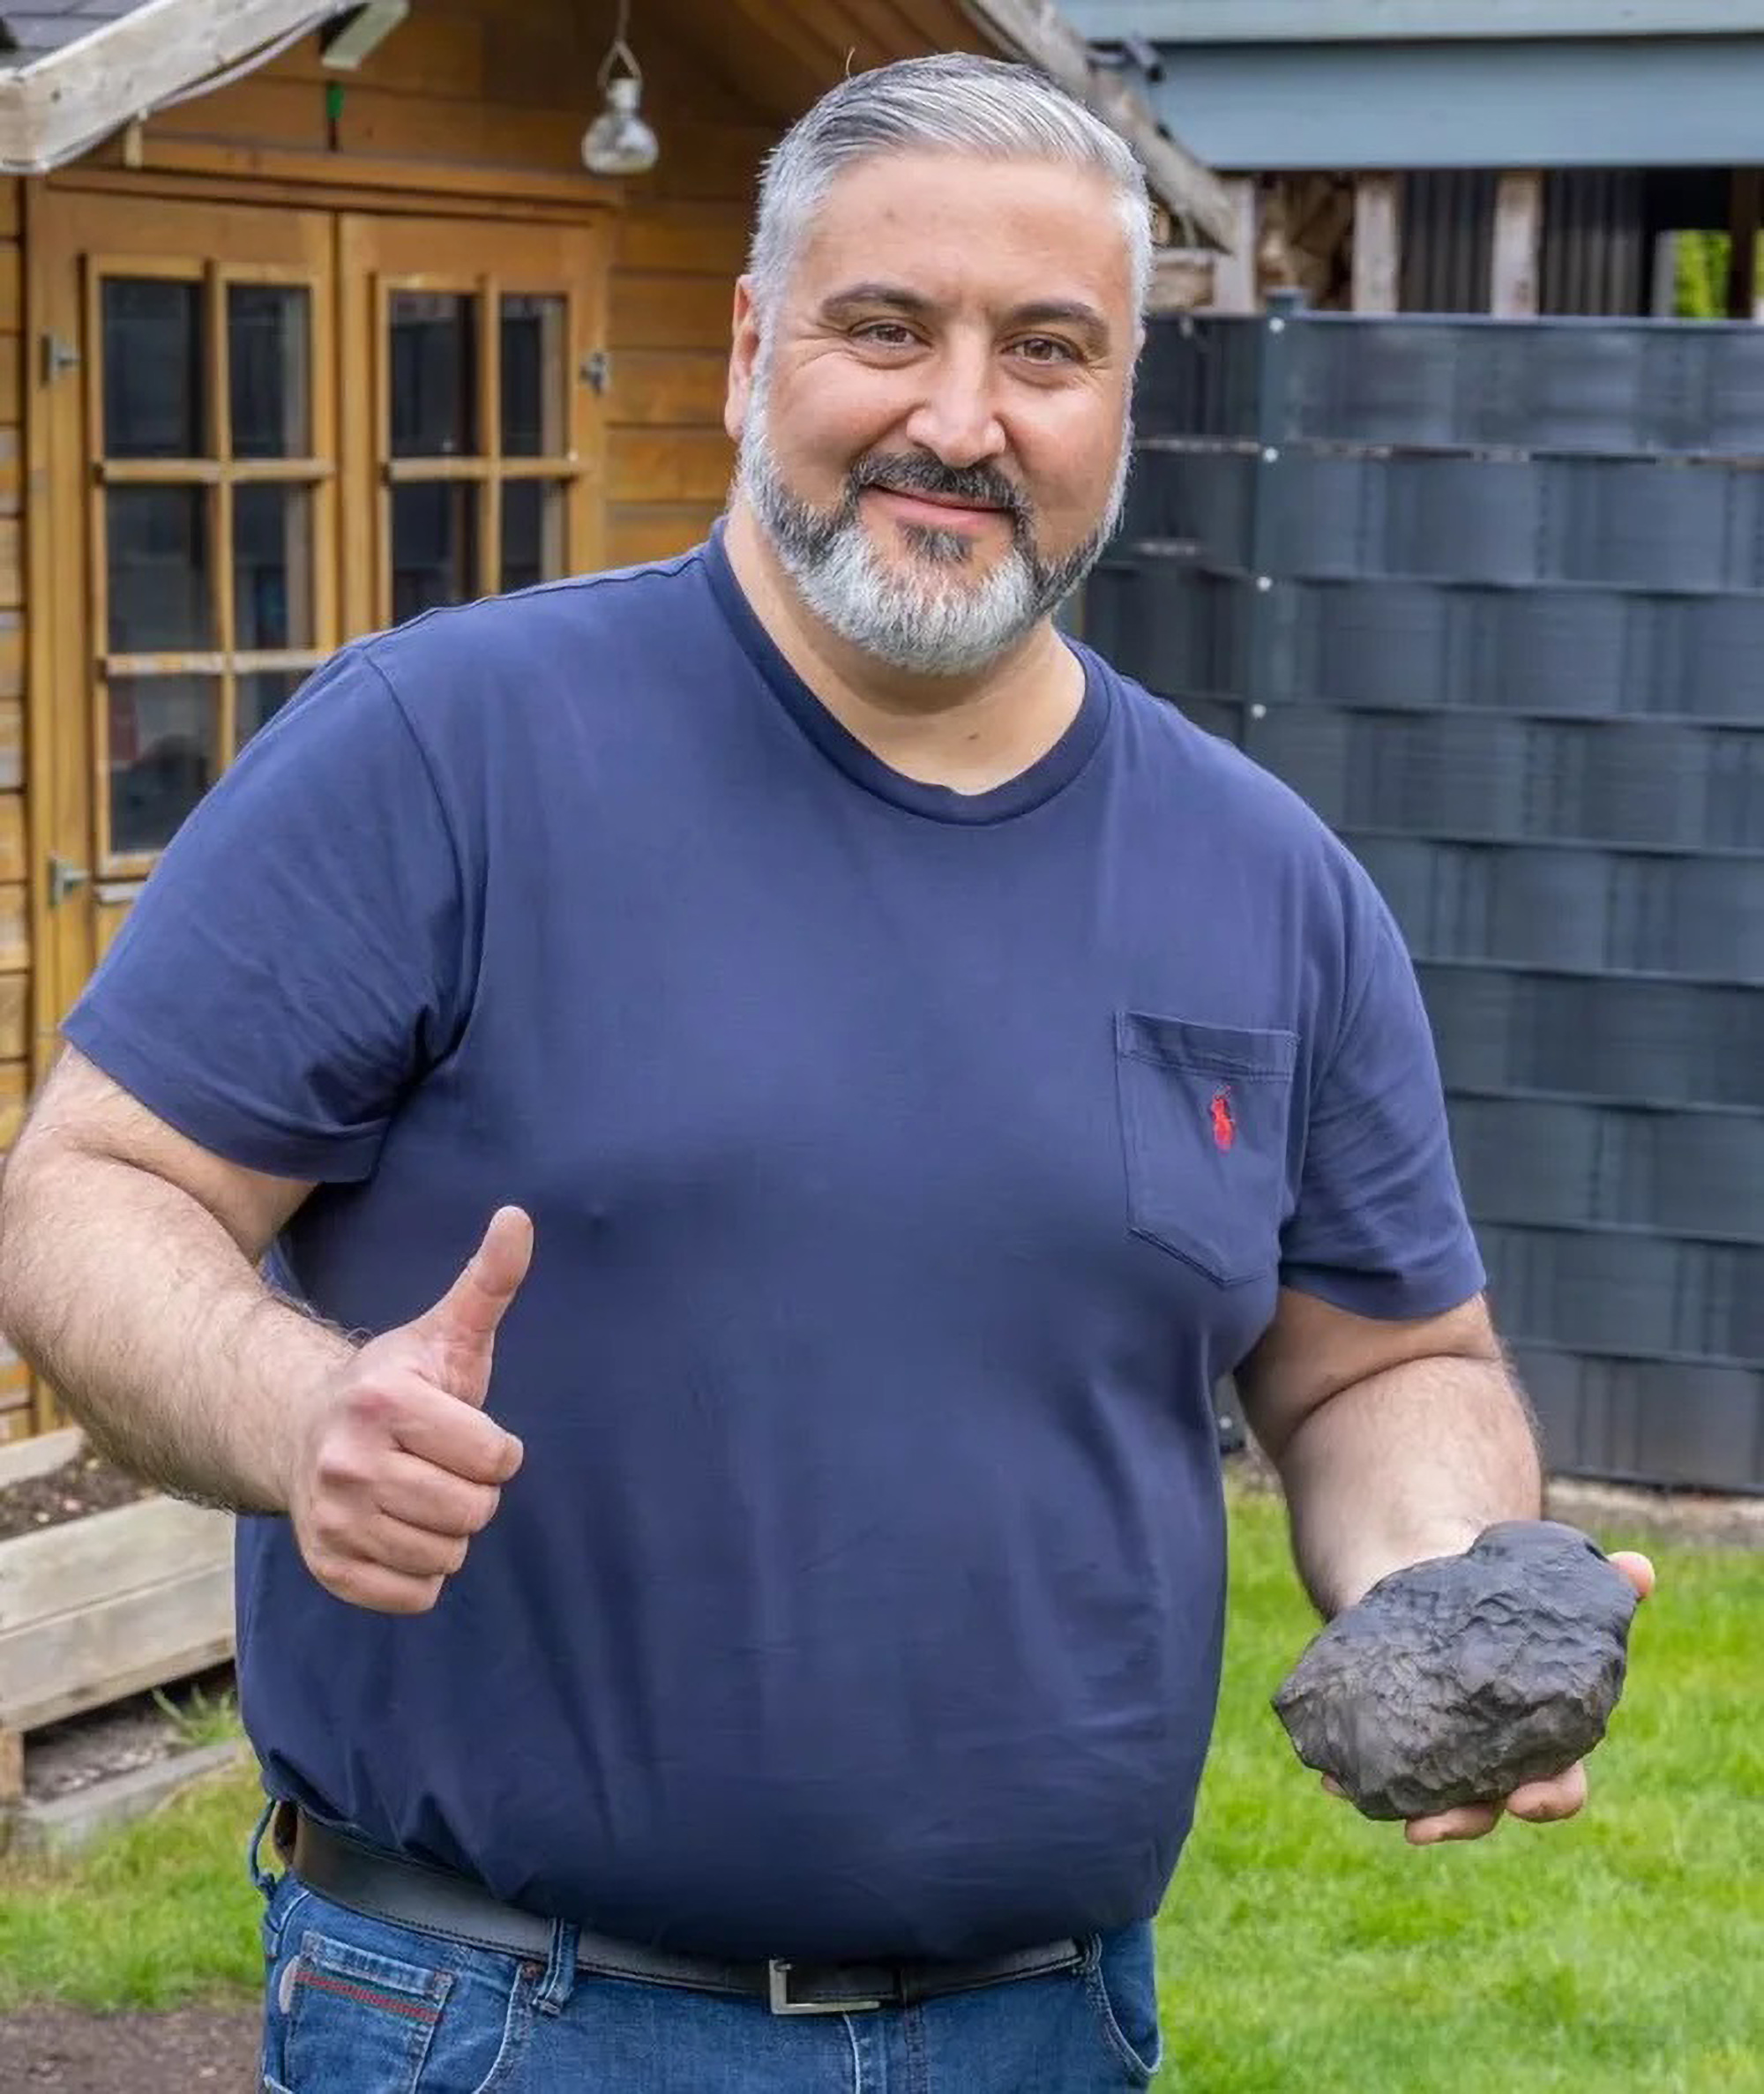 Read more about the article German Homeowner To Cash In Over GBP 170,000 After Jupiter Meteorite Landed In Garden